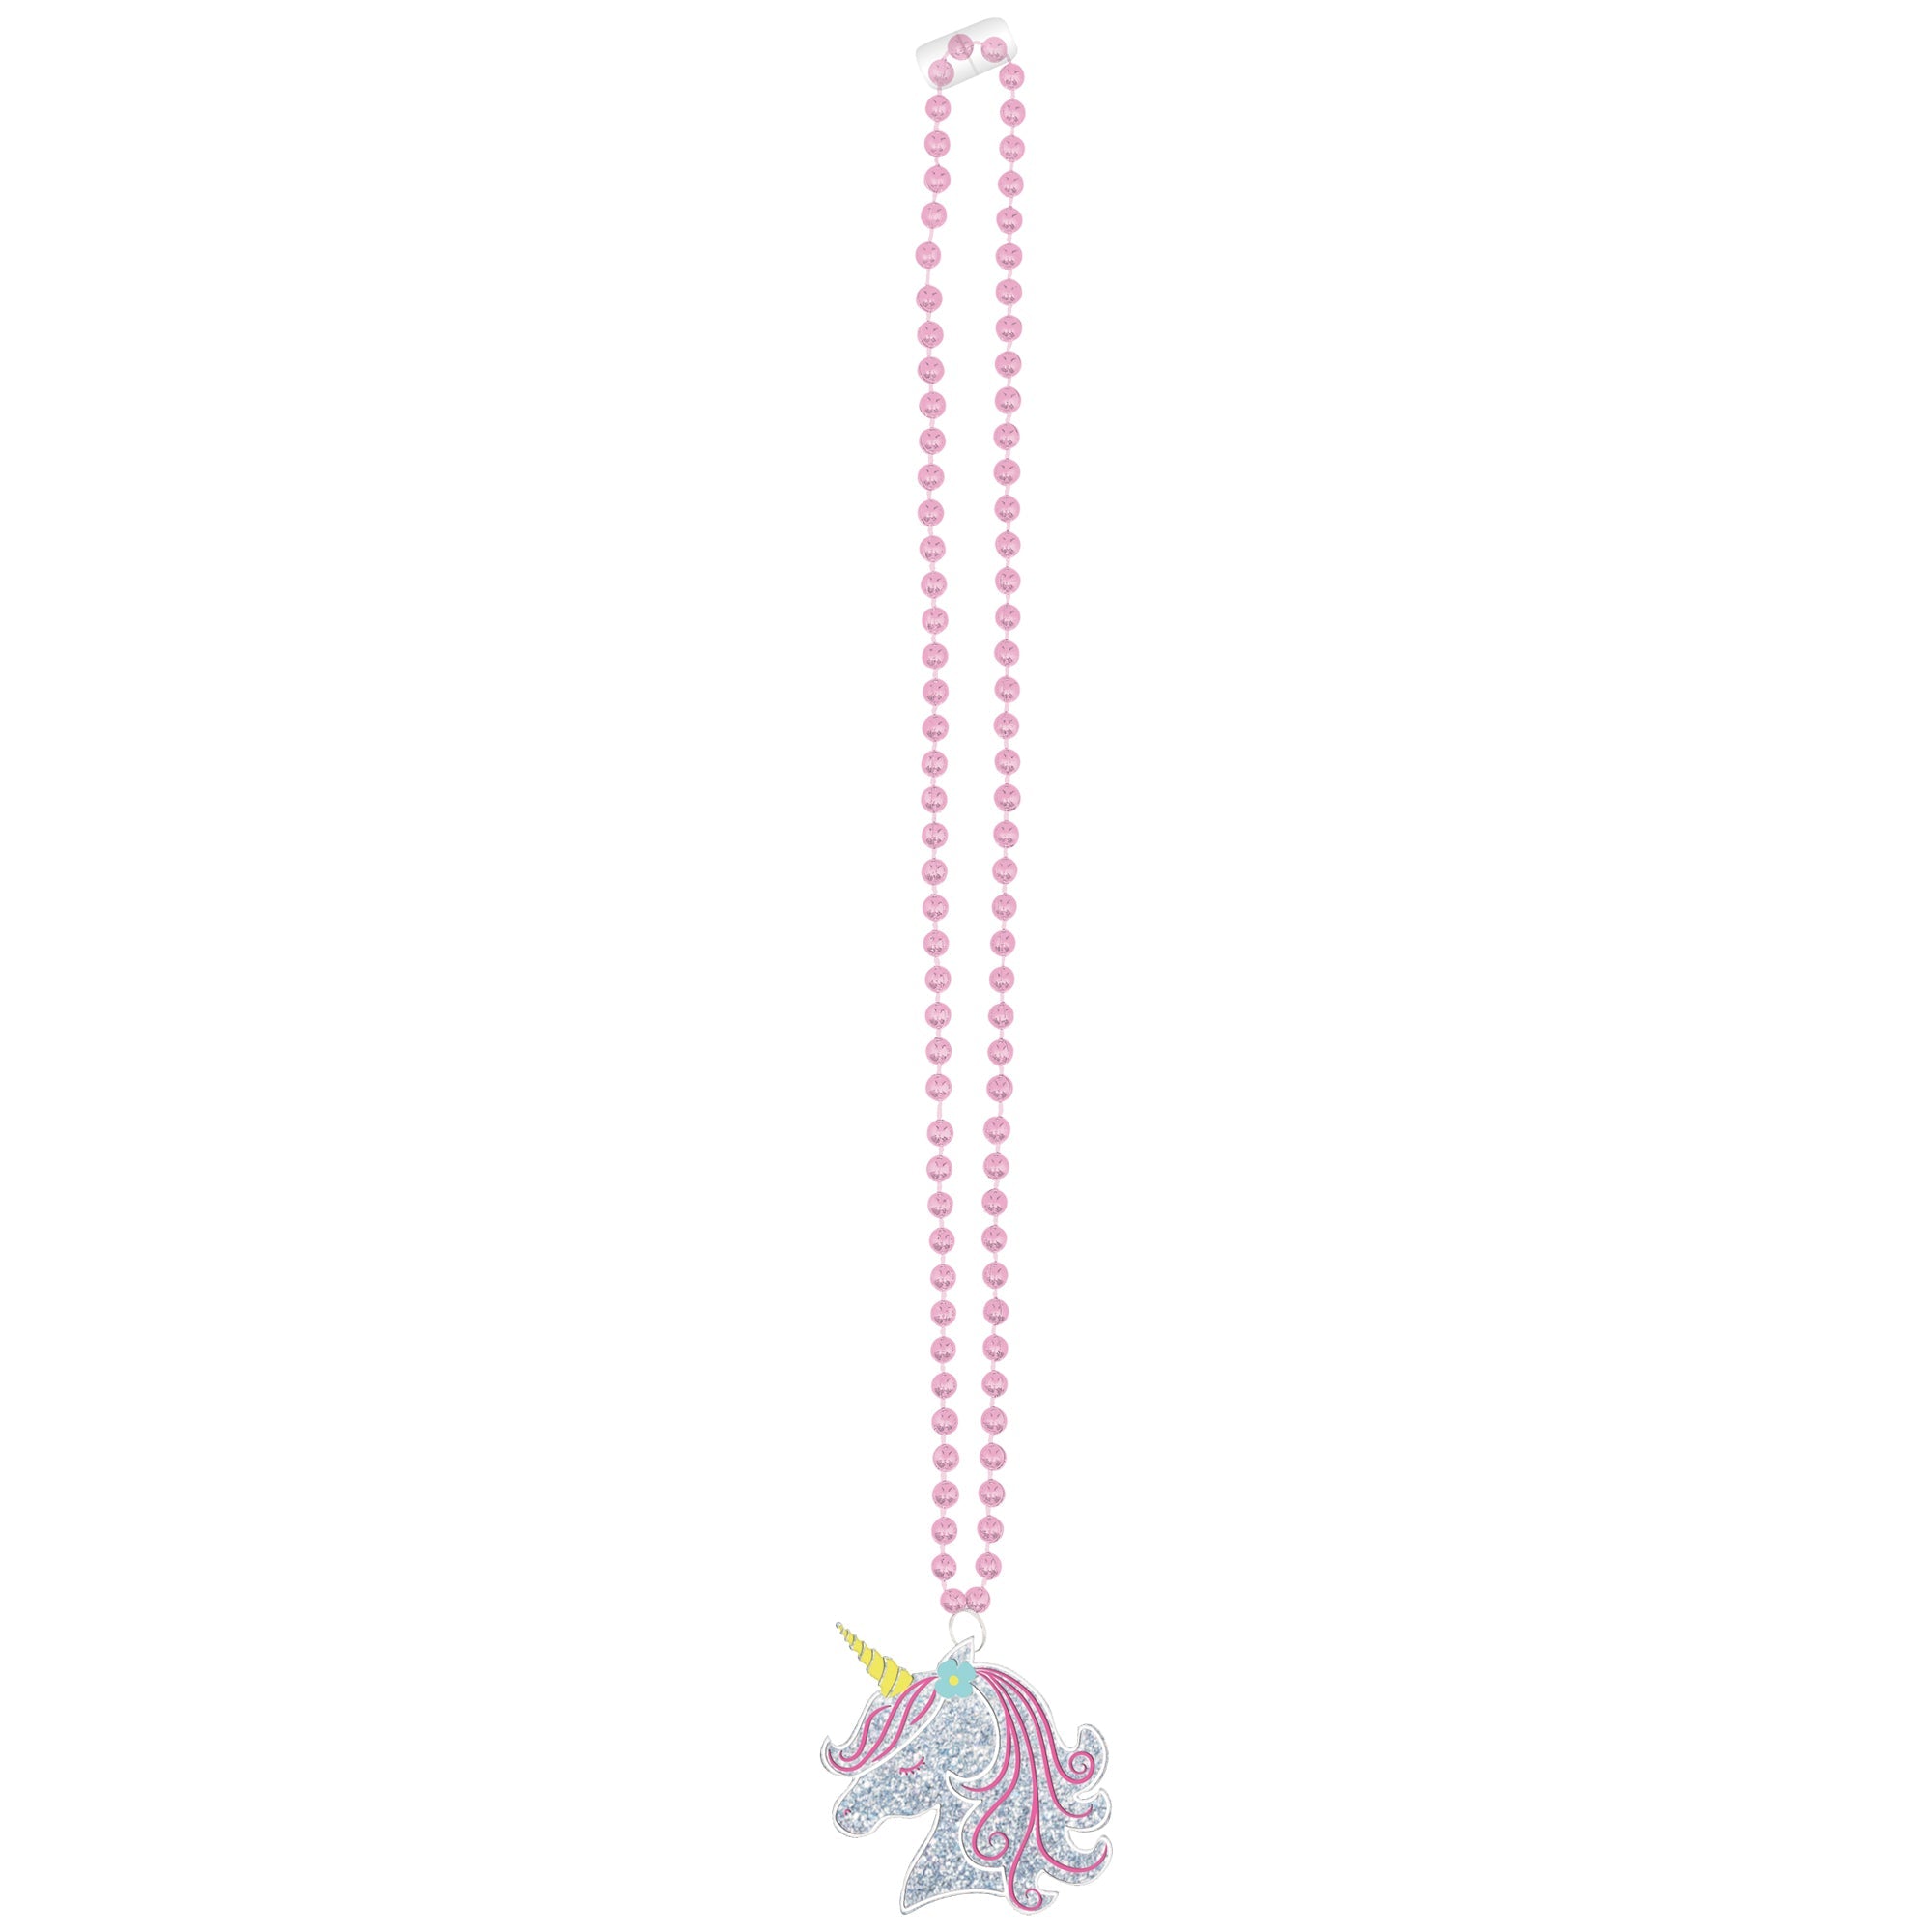 Enchanted Unicorn Pendant  Necklace 8.5in  Pendant 1in